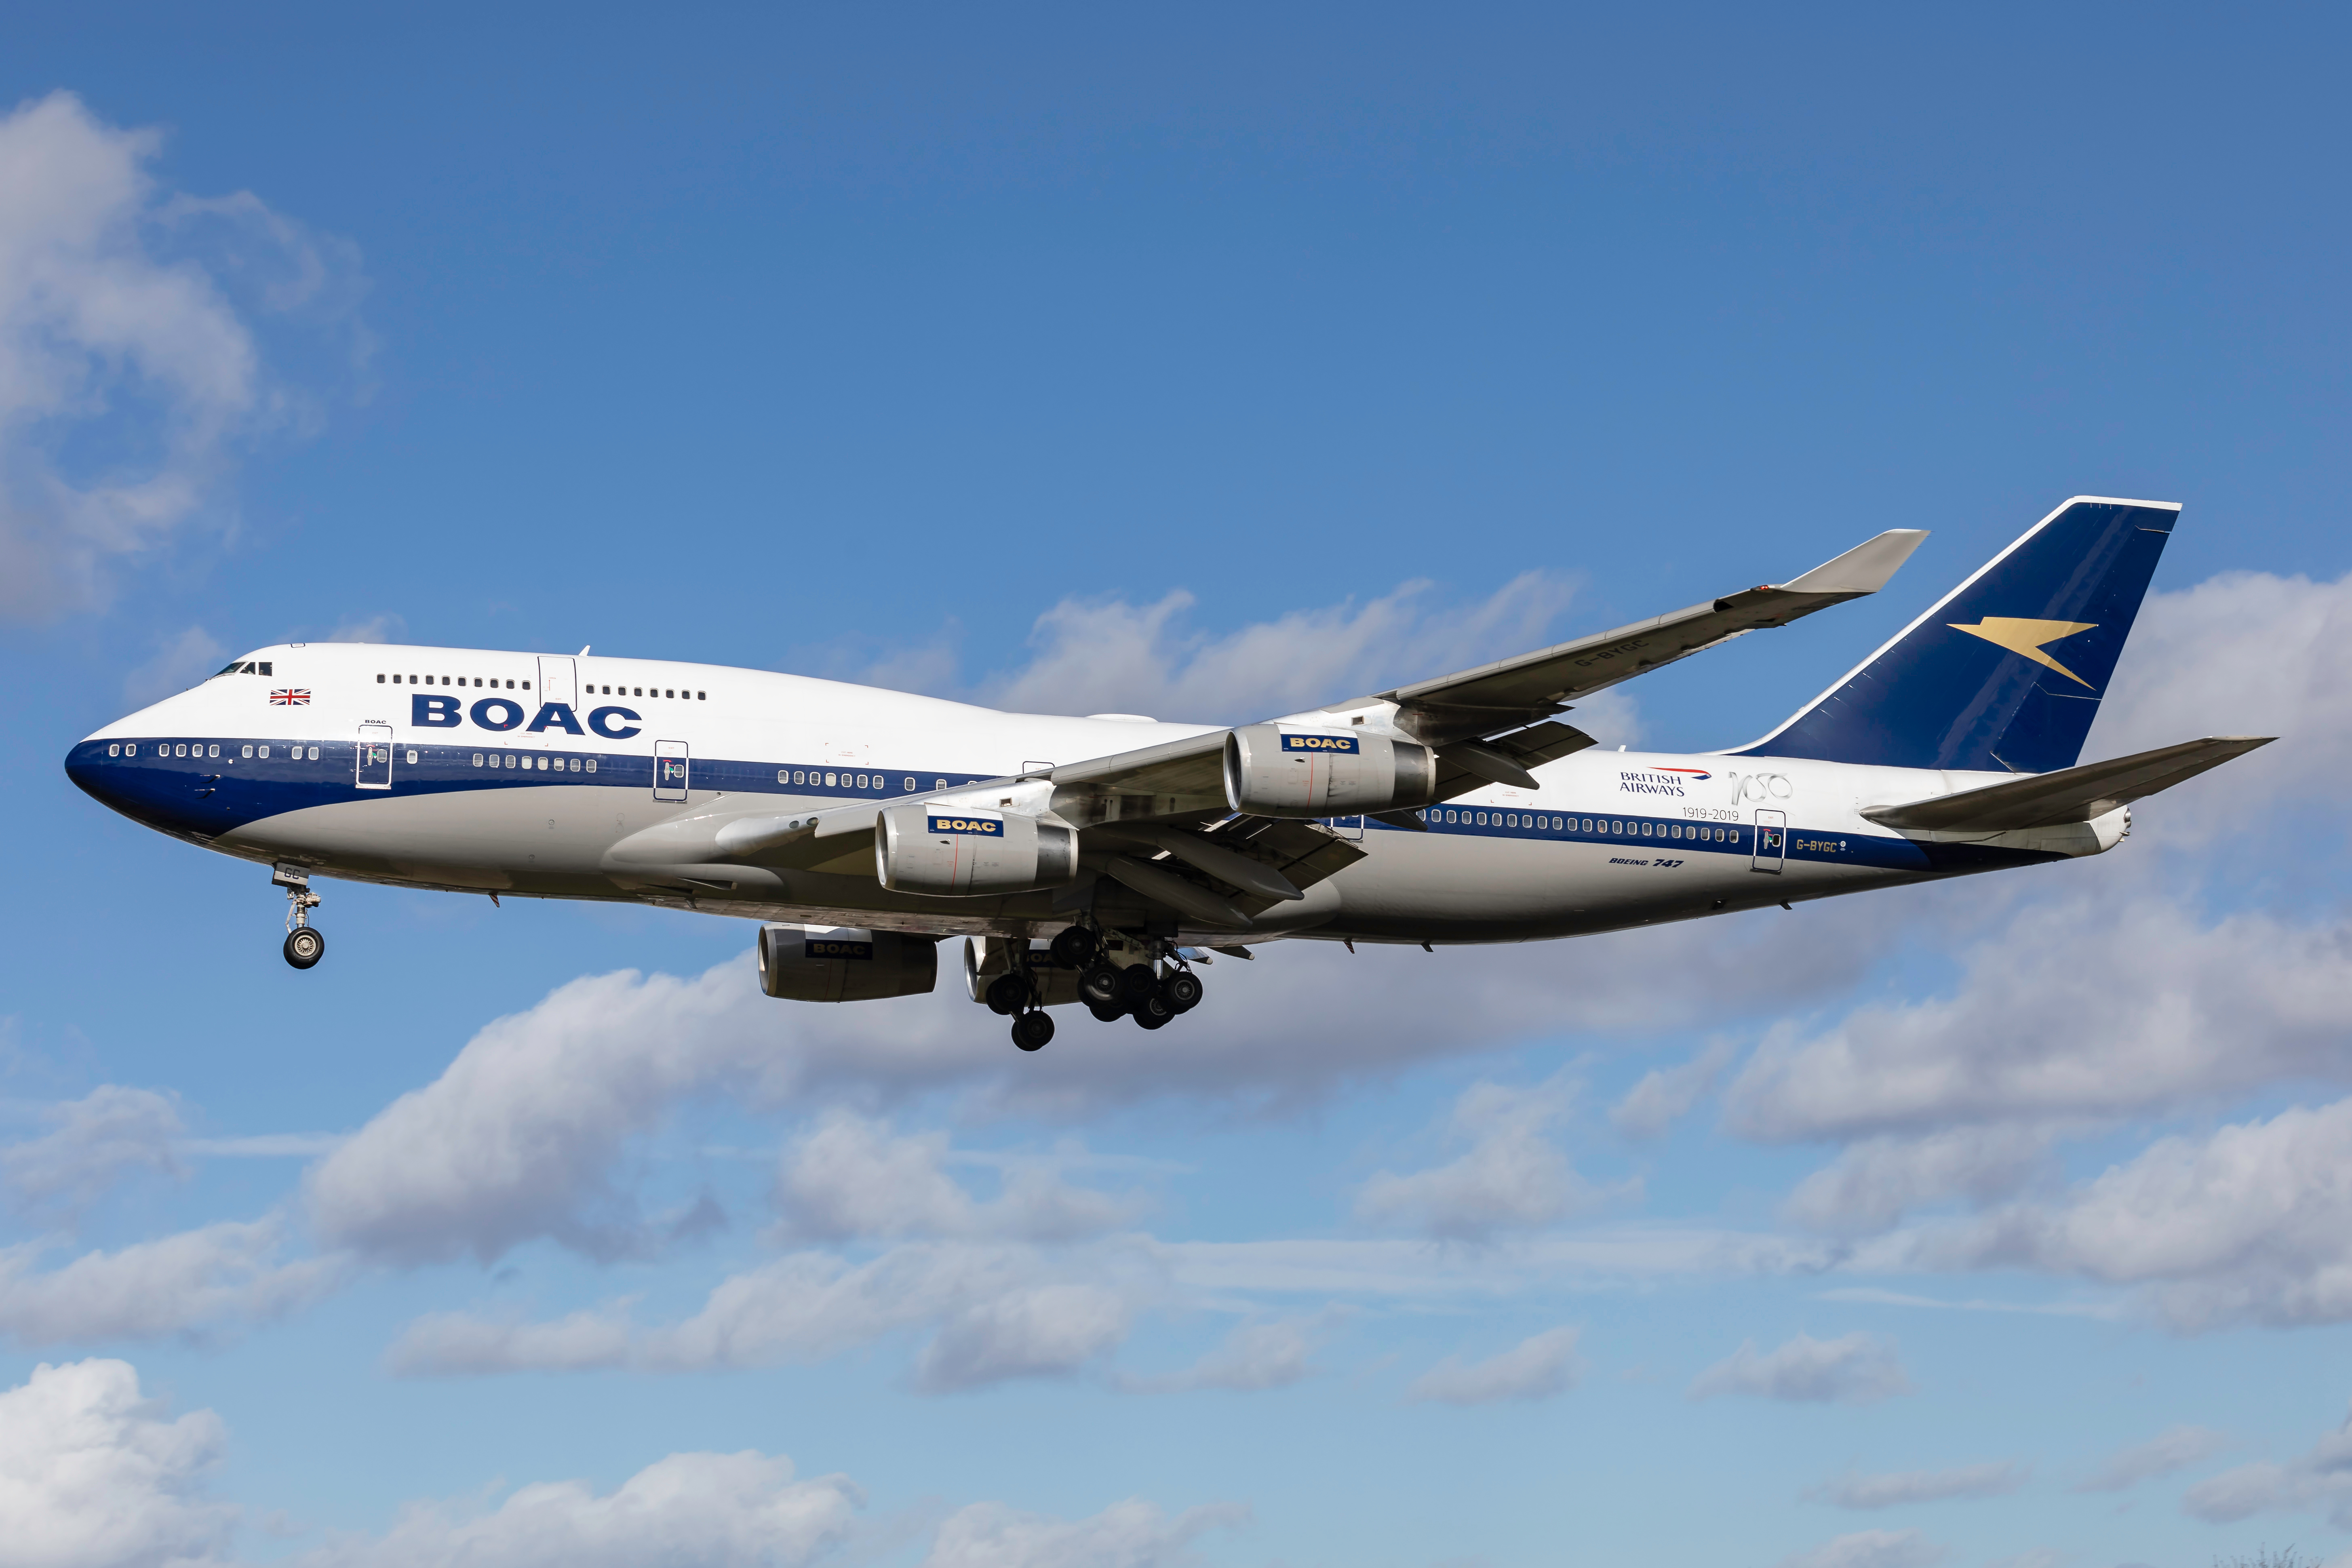 BA 747 with BOAC livery to celebrate 100 year anniversary